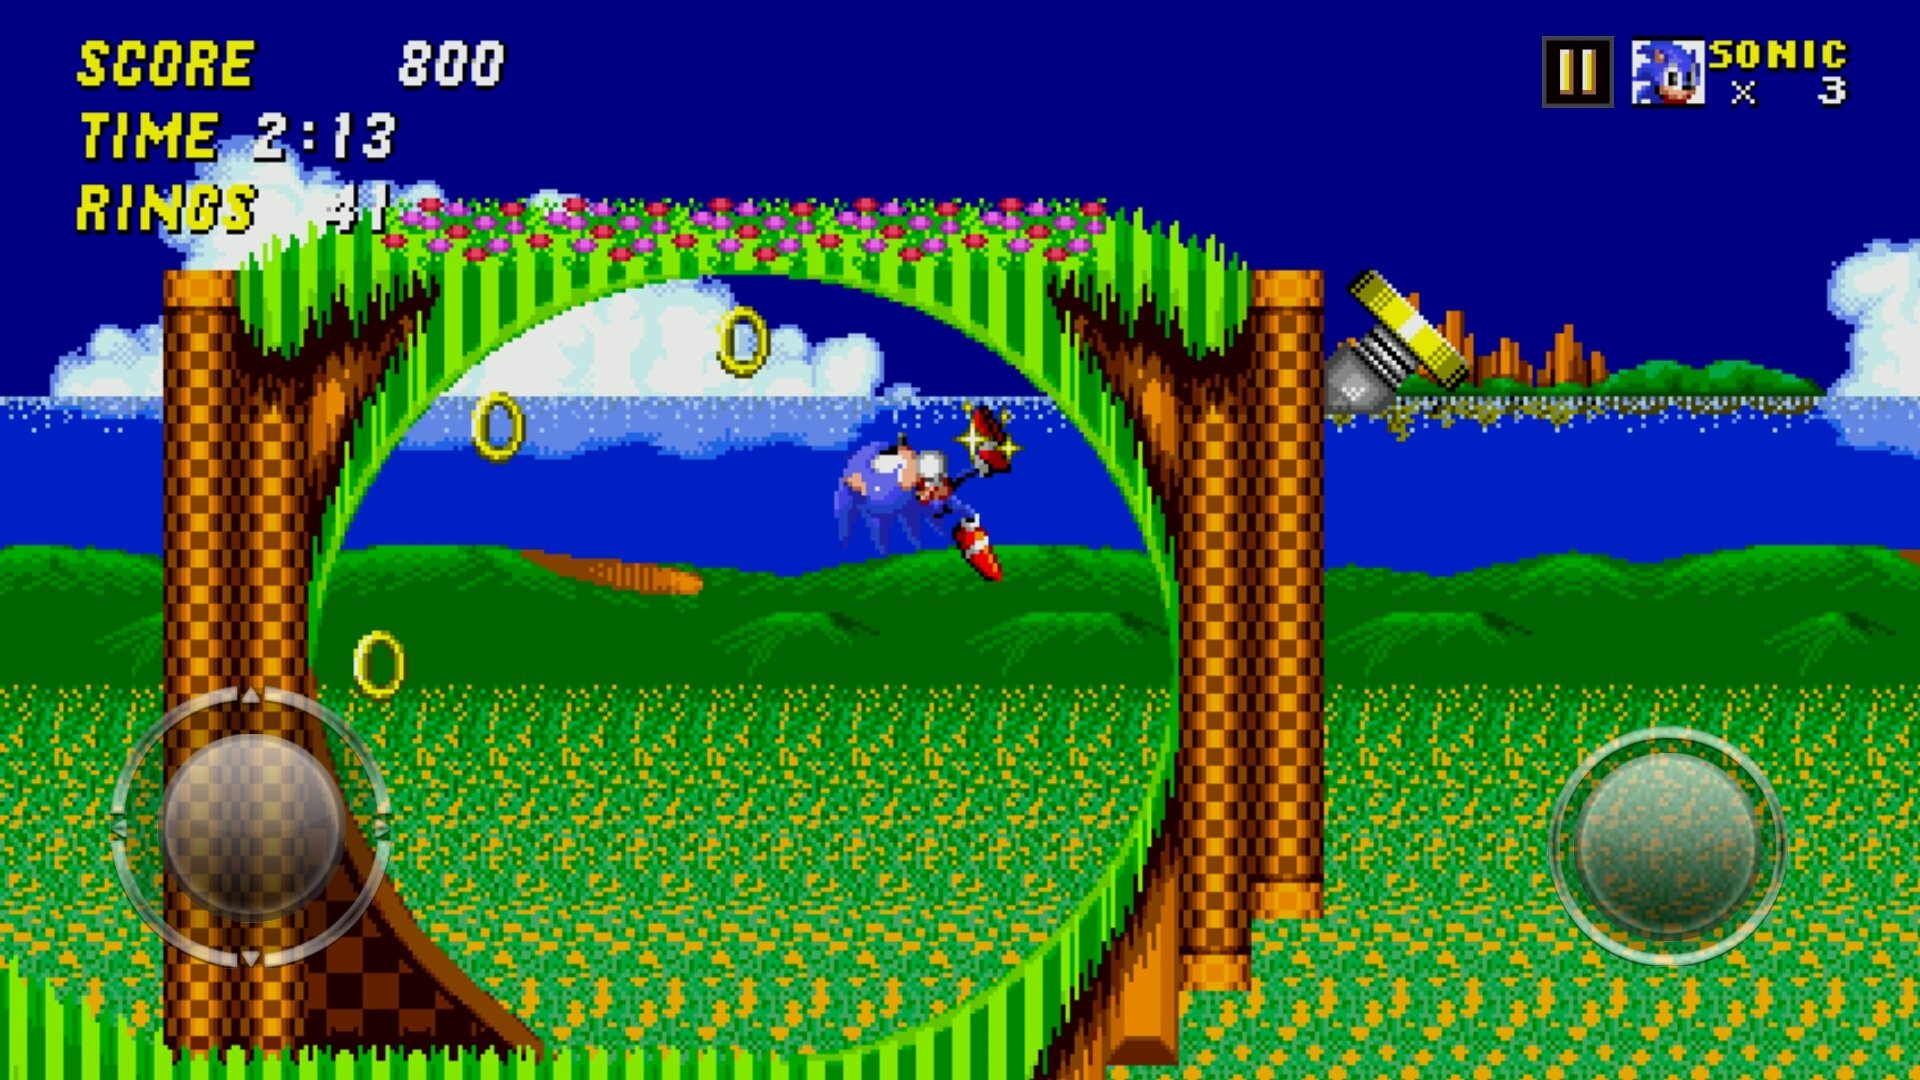 Sonic The Hedgehog 2 Classic APK Download for Android Free